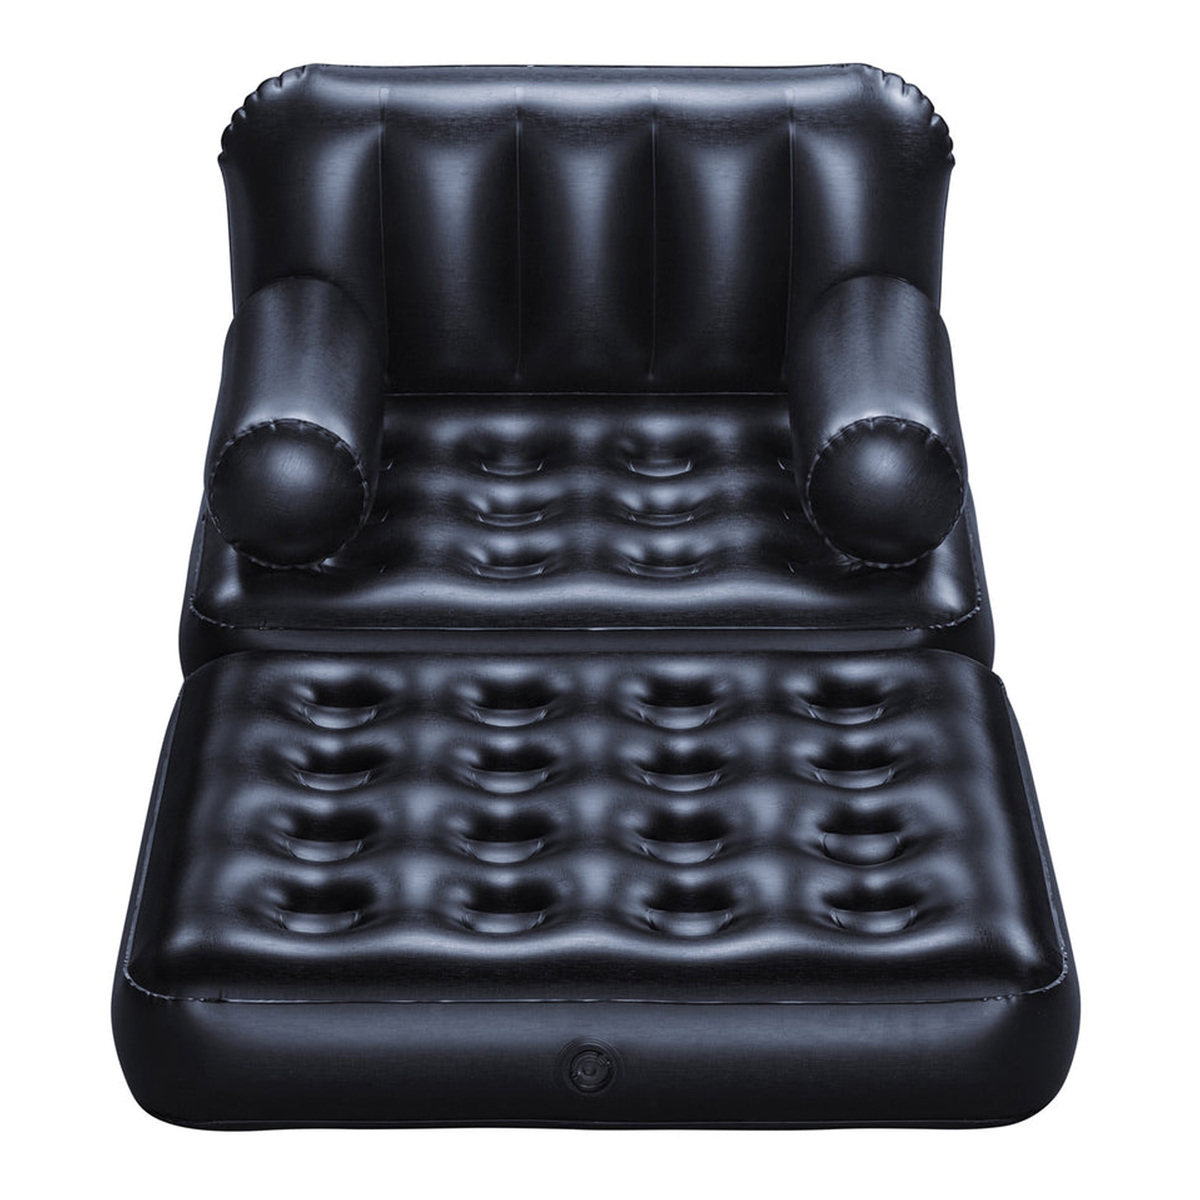 Best Way 4-in-1 Air Lounger, 75114